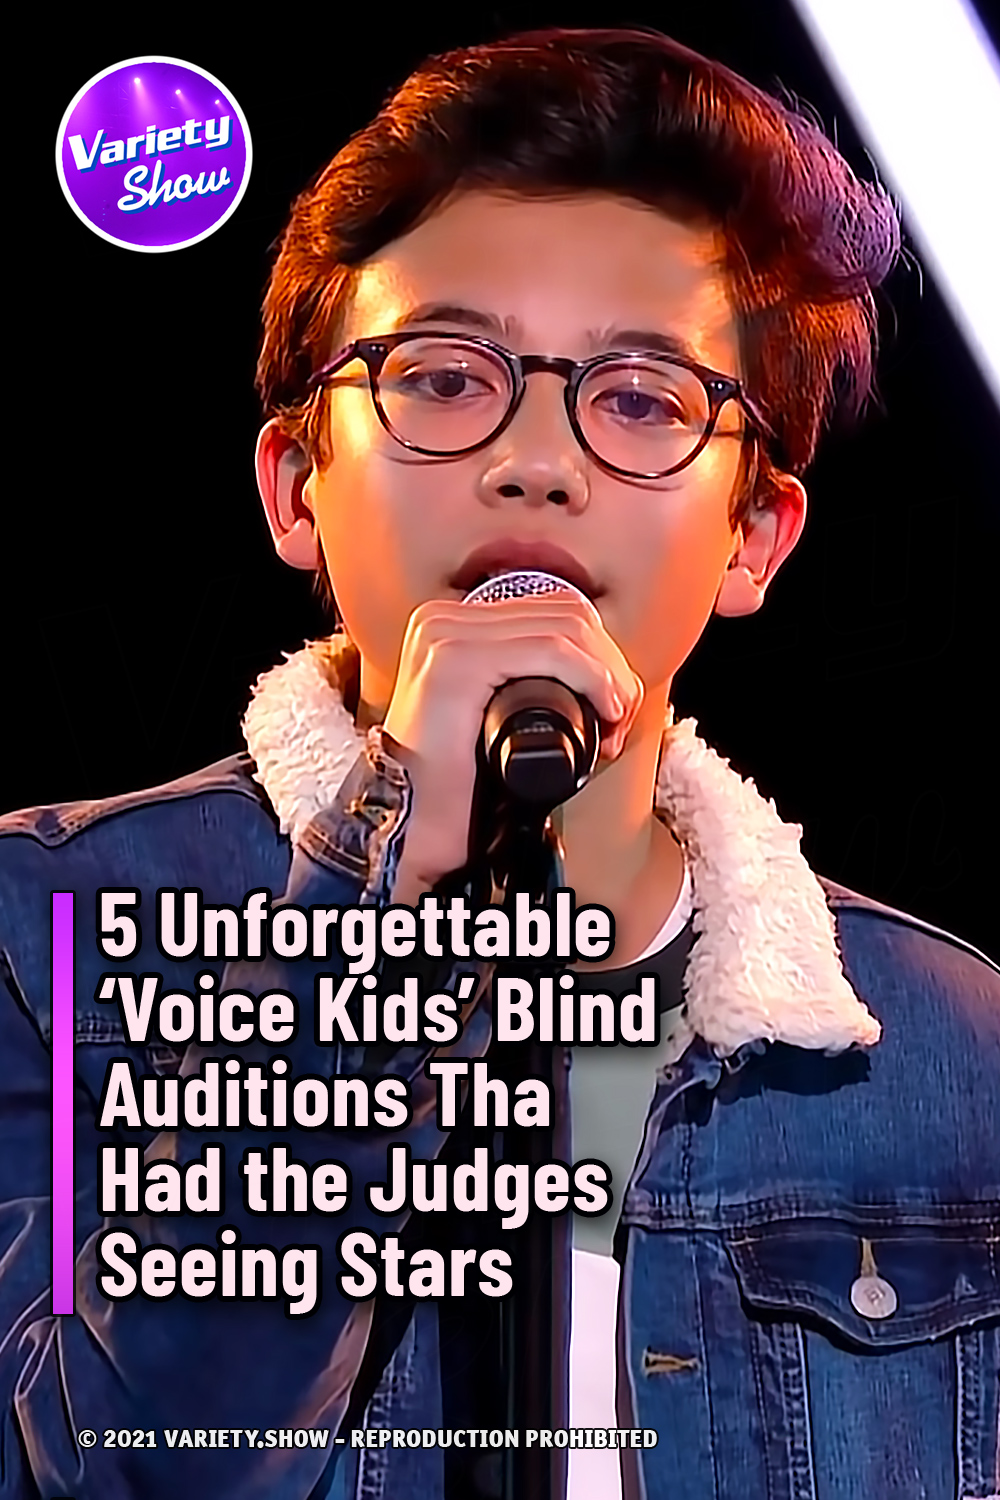 5 Unforgettable ‘Voice Kids’ Blind Auditions That Had the Judges Seeing Stars